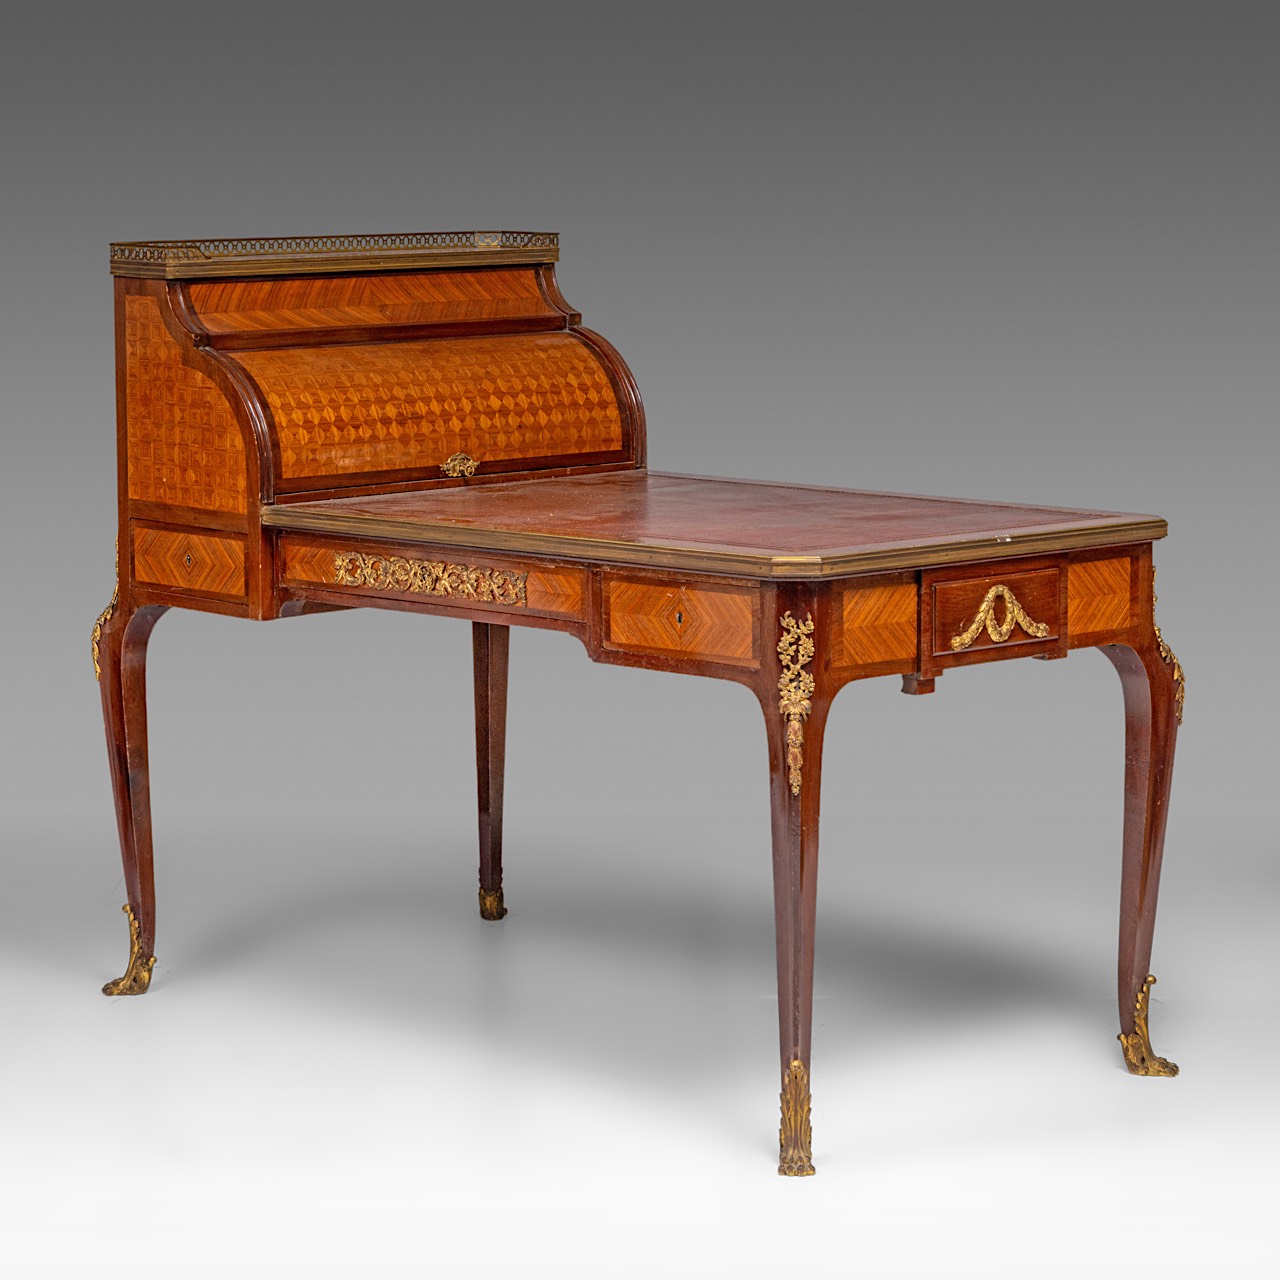 A leather-topped Transitional-style bureau plat and rolltop desk with parquetry and gilt bronze moun